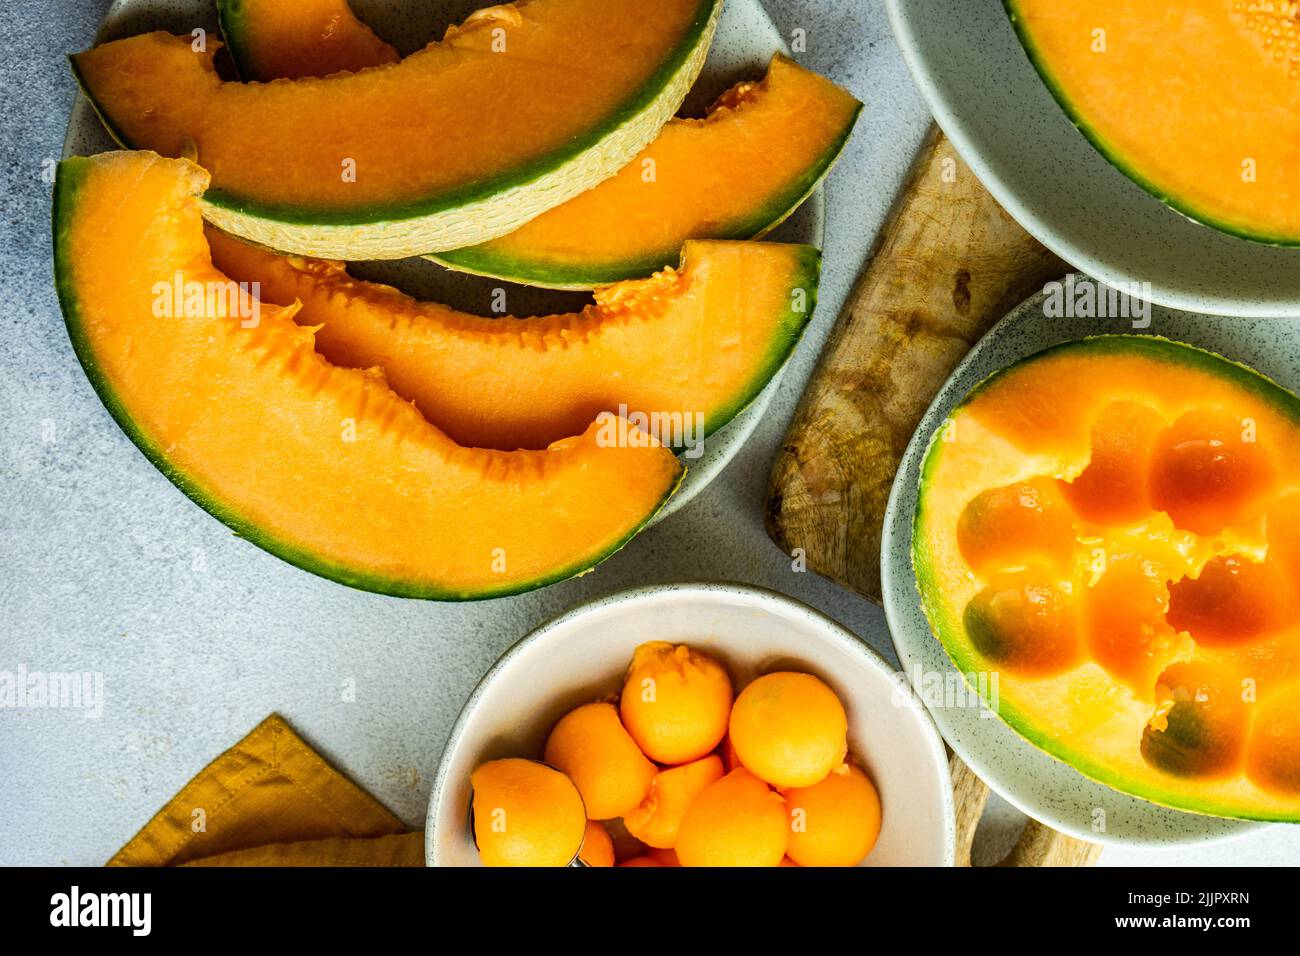 Overhead view of slices of cantaloupe melon and melon balls being prepared on a table Stock Photo